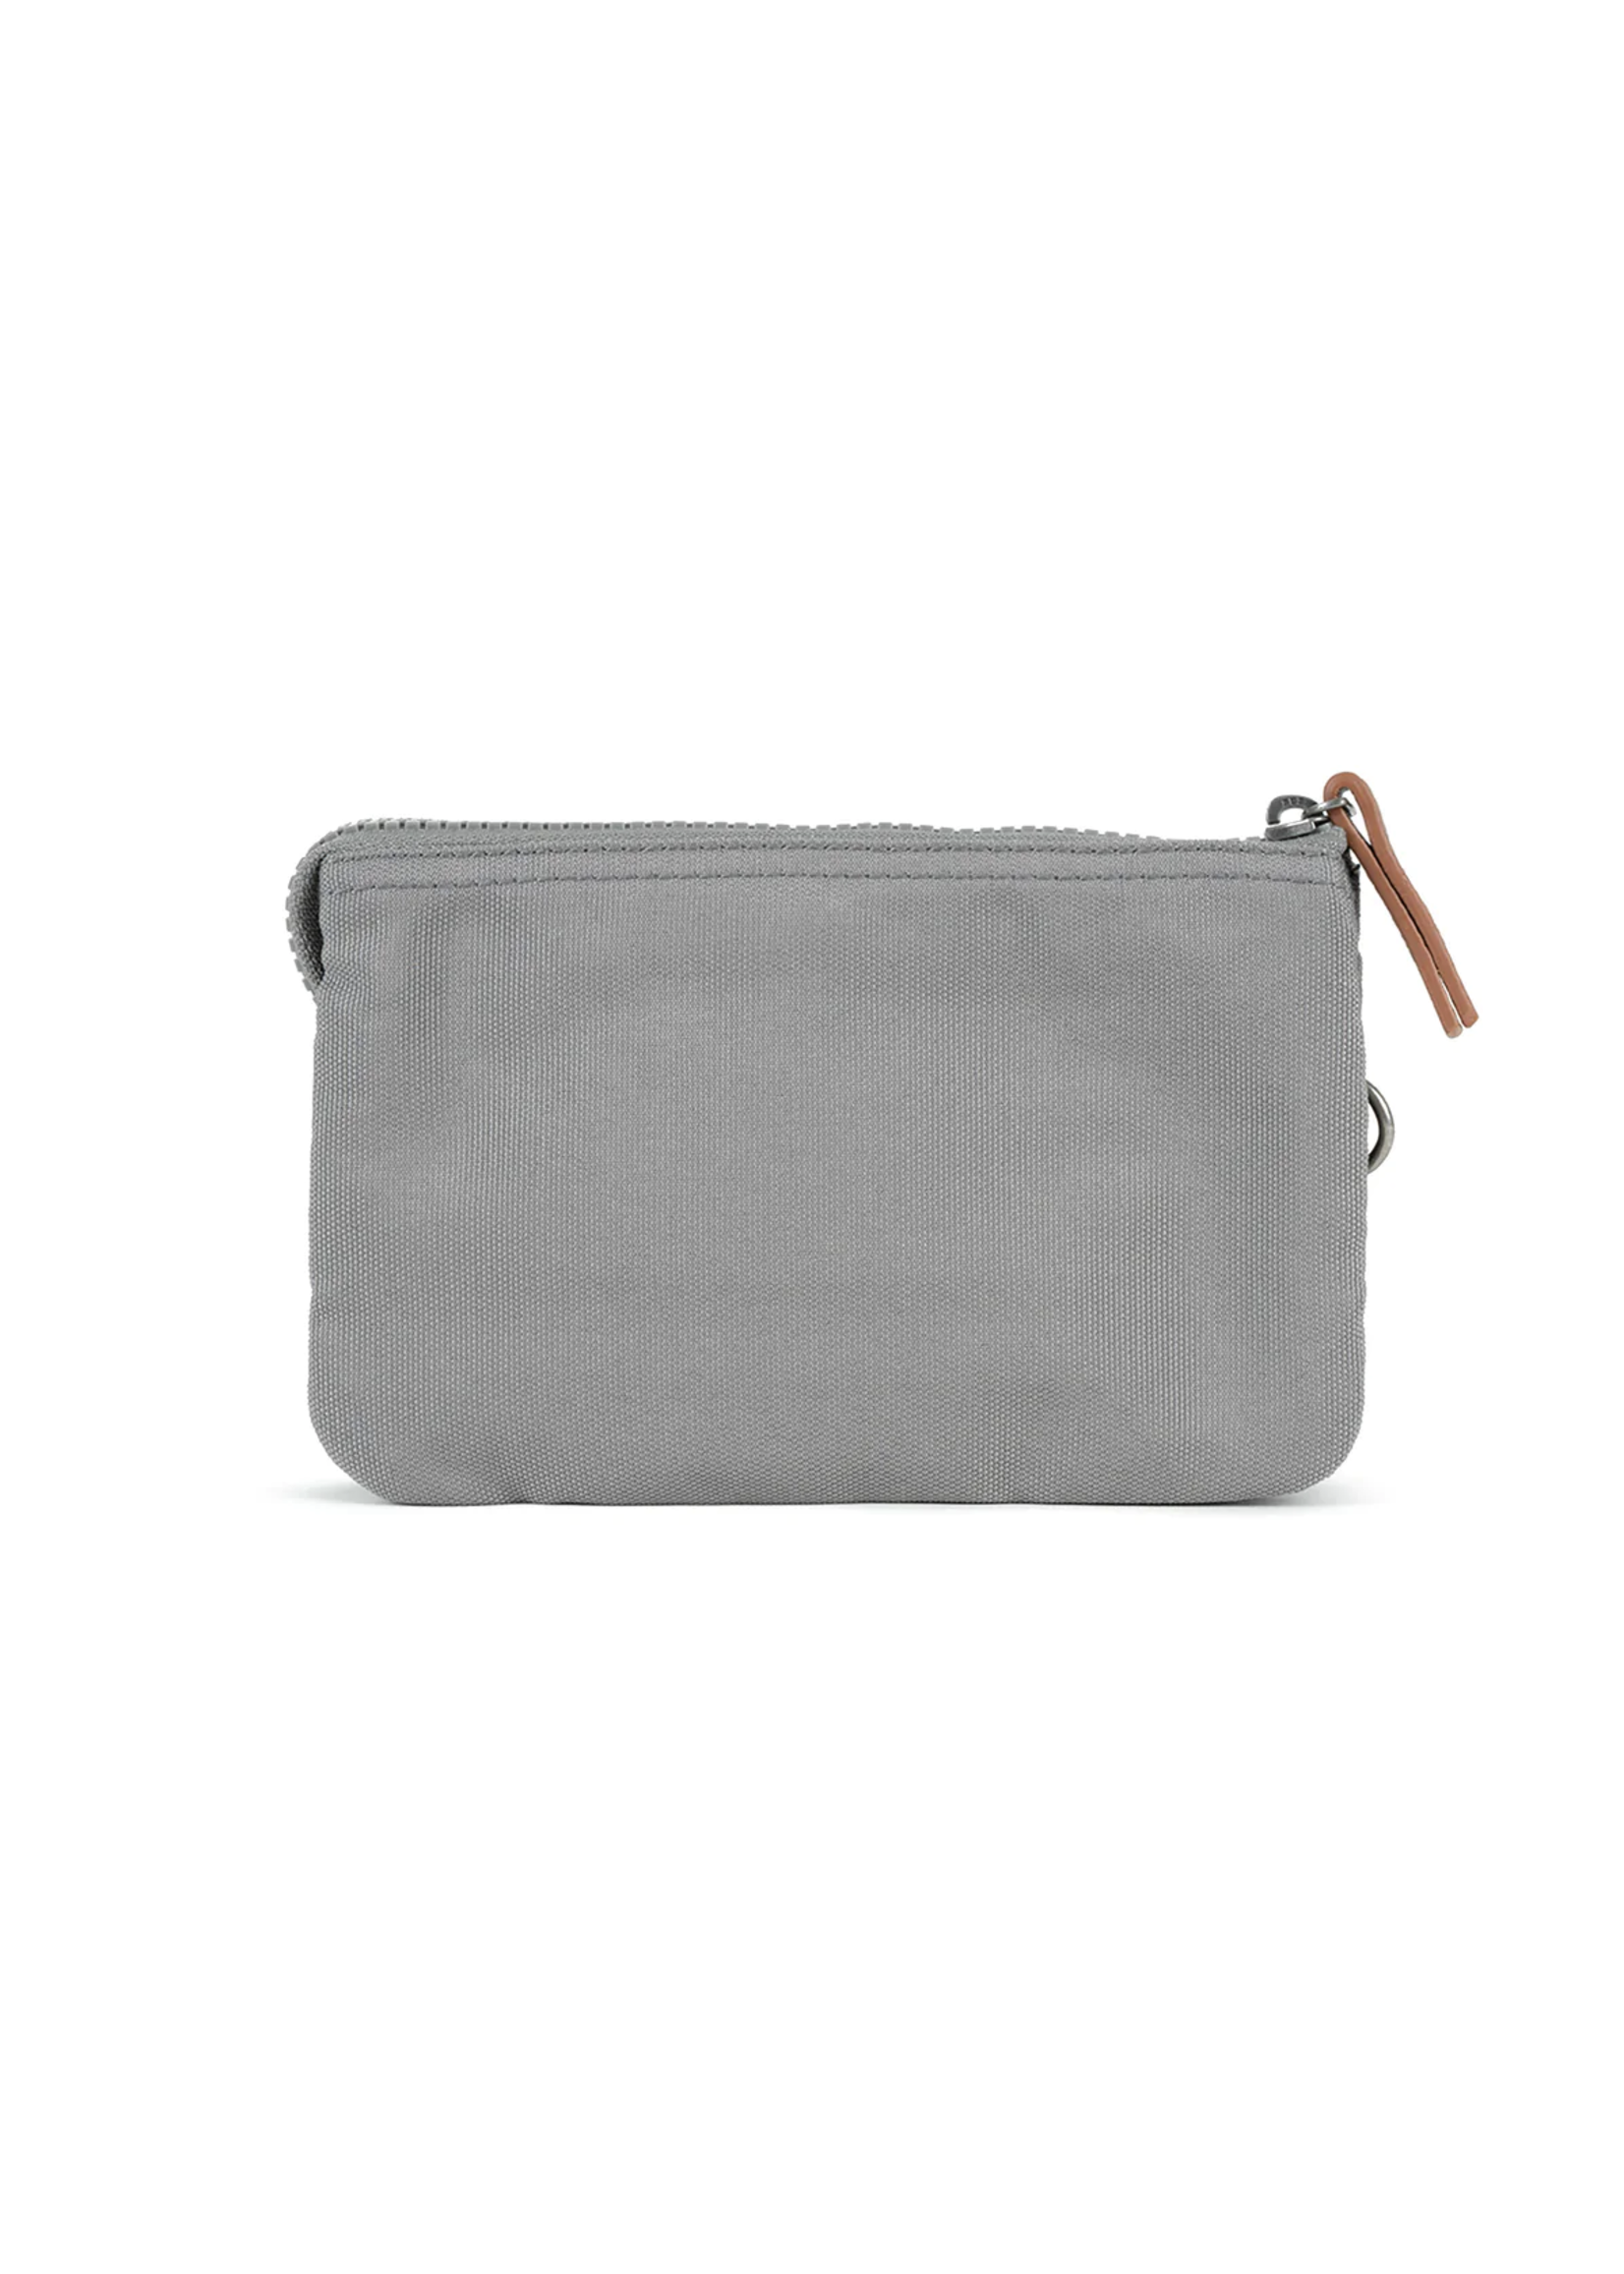 ROKA London Carnaby Small Wallet Sustainable Canvas Stormy